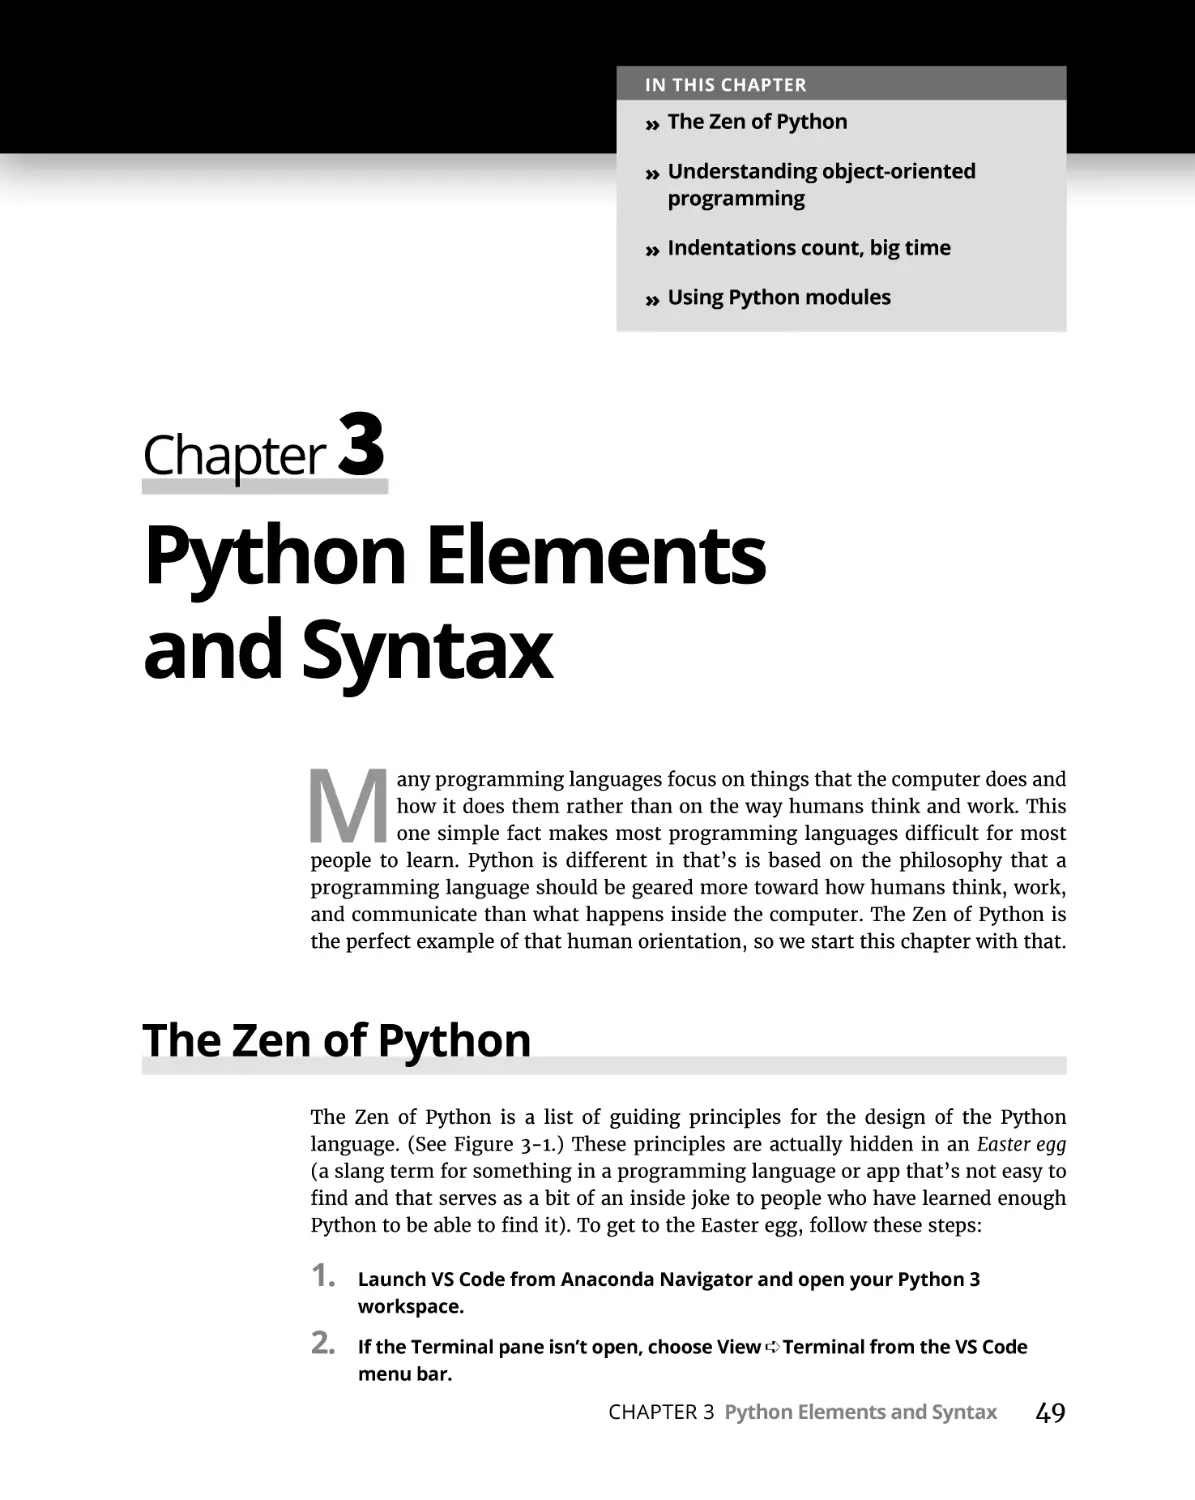 Chapter 3 Python Elements and Syntax
The Zen of Python